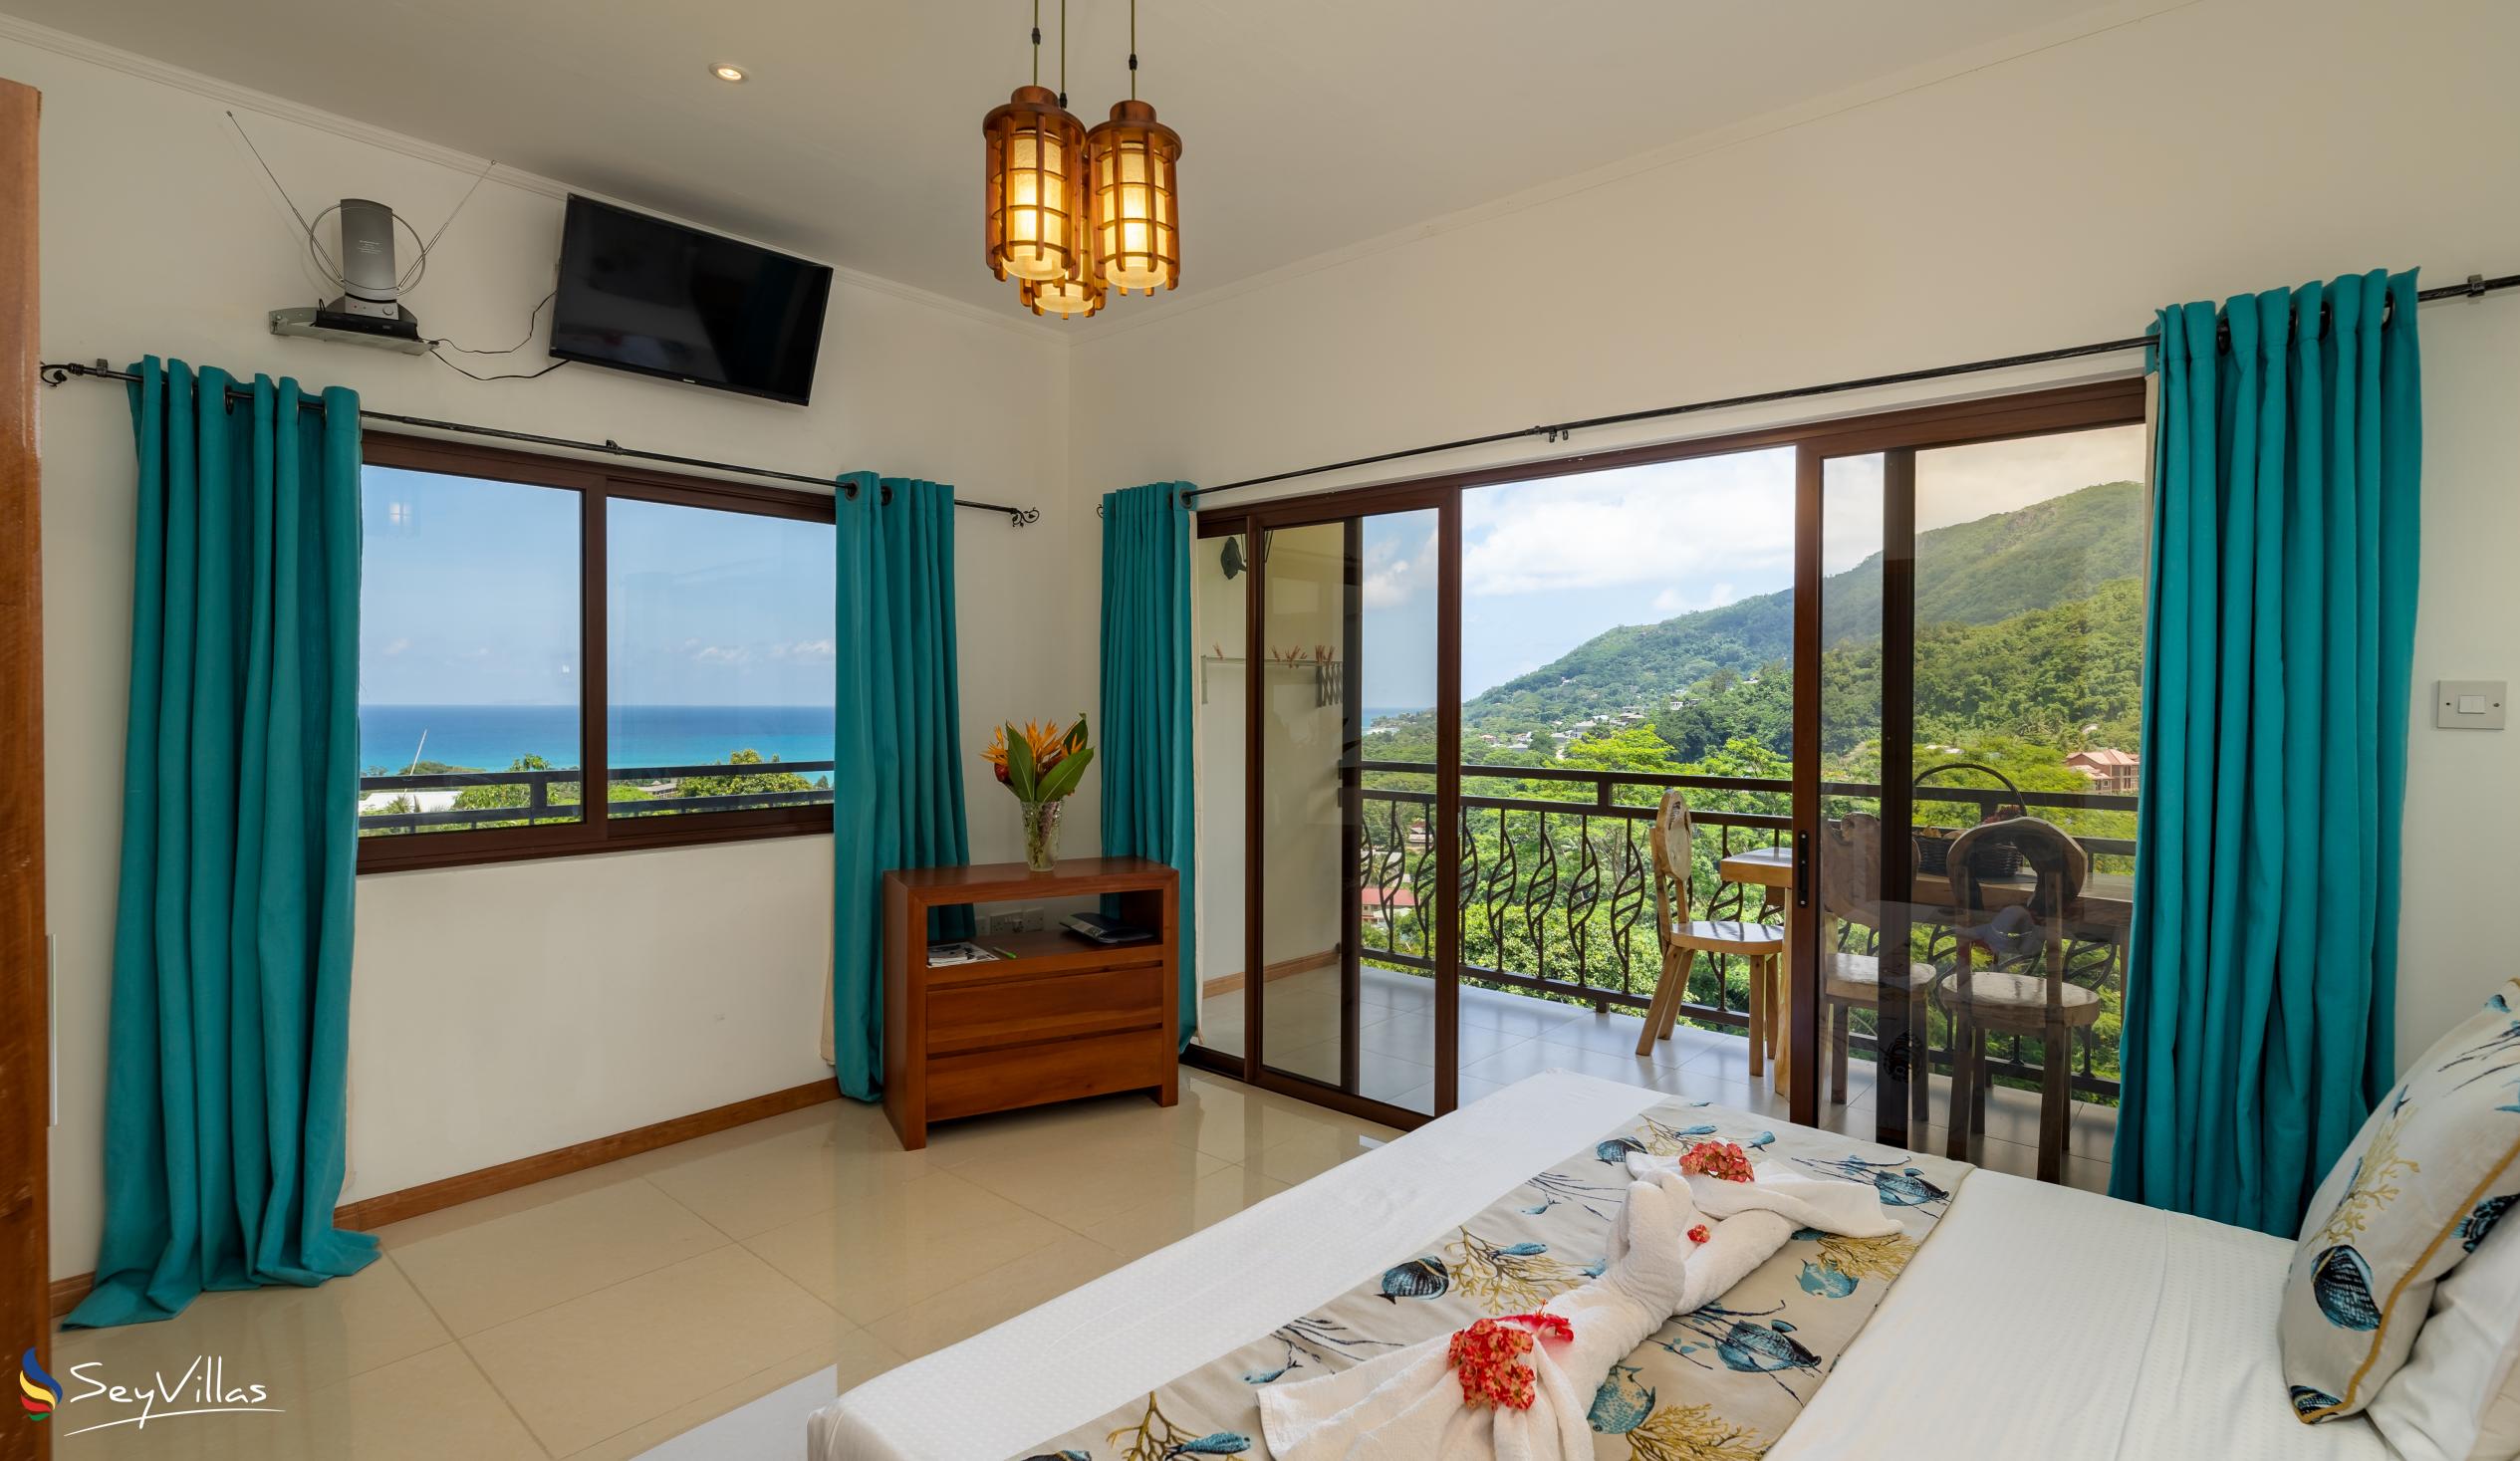 Foto 31: Tama's Holiday Apartments - Appartement 1 chambre - Mahé (Seychelles)